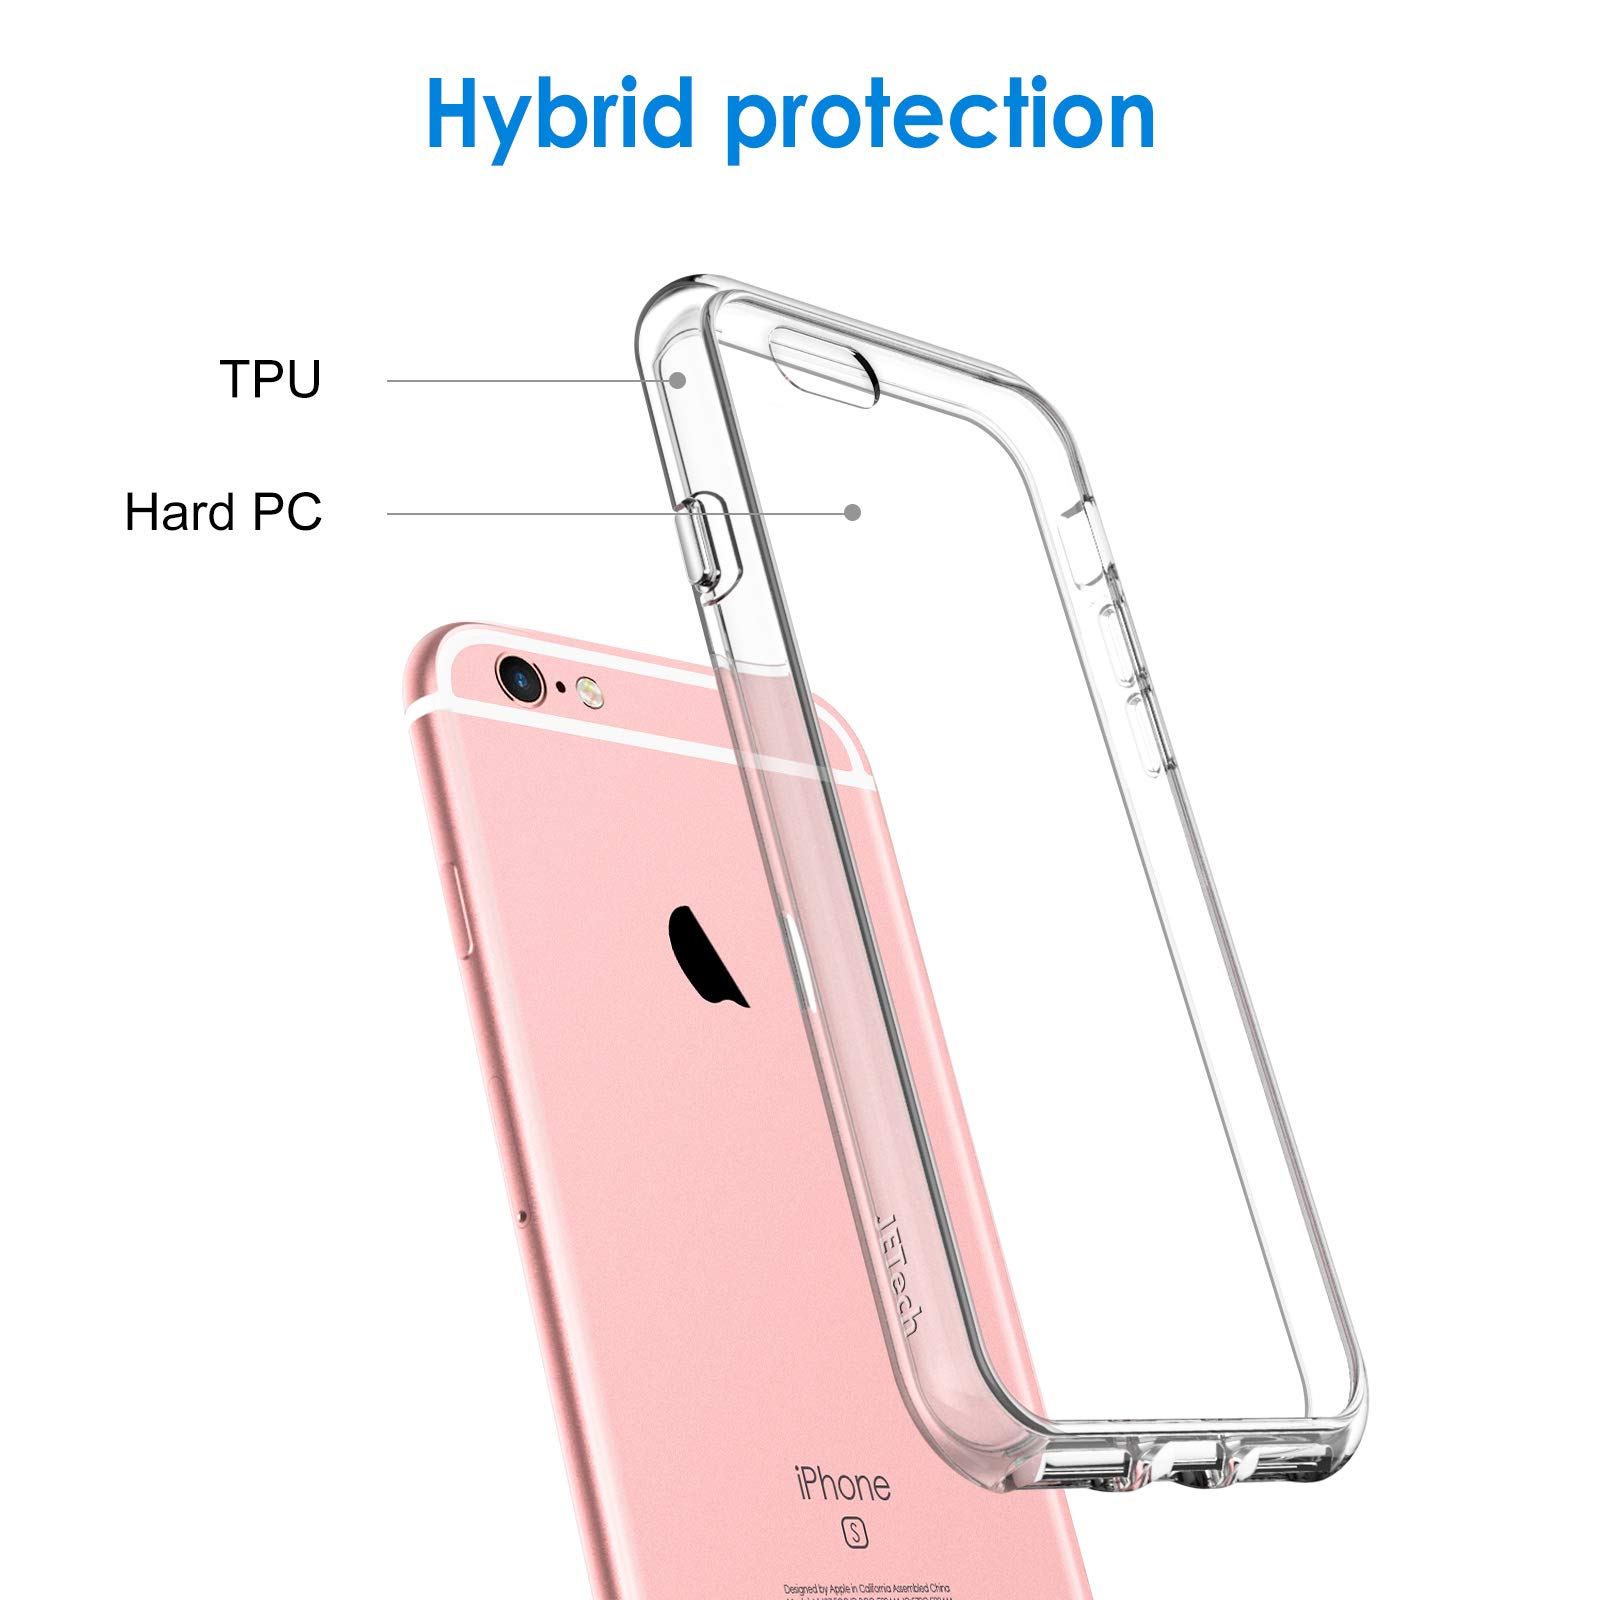 JETech Case for iPhone 6 and iPhone 6s, Non-Yellowing Shockproof Phone Bumper Cover, Anti-Scratch Clear Back (Clear)